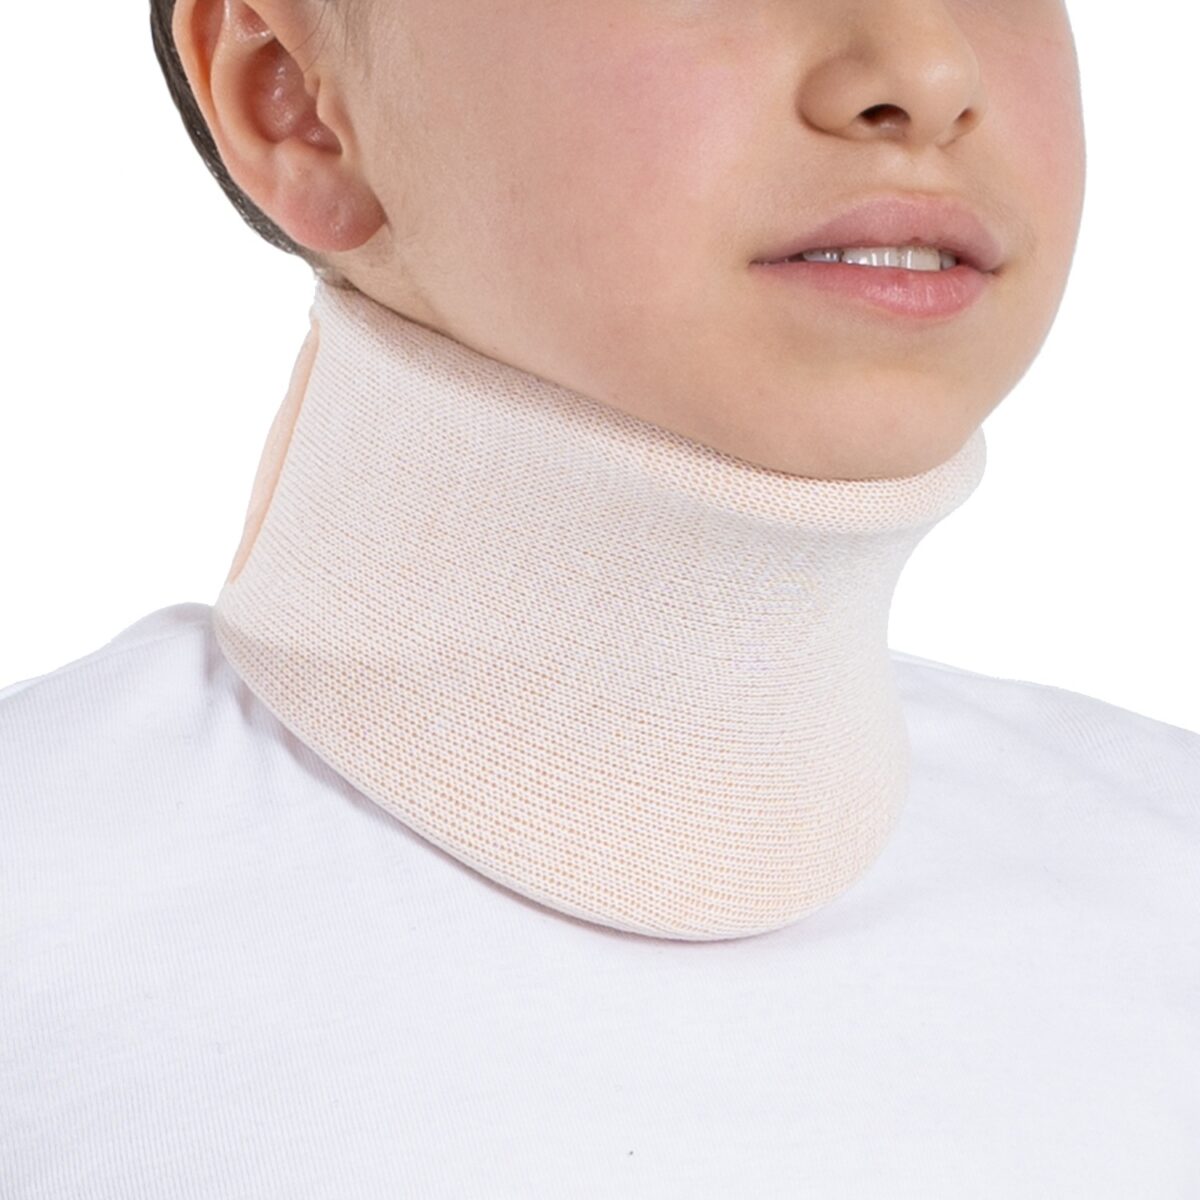 wingmed orthopedic equipments W903 nelson collar with fabric coated 68